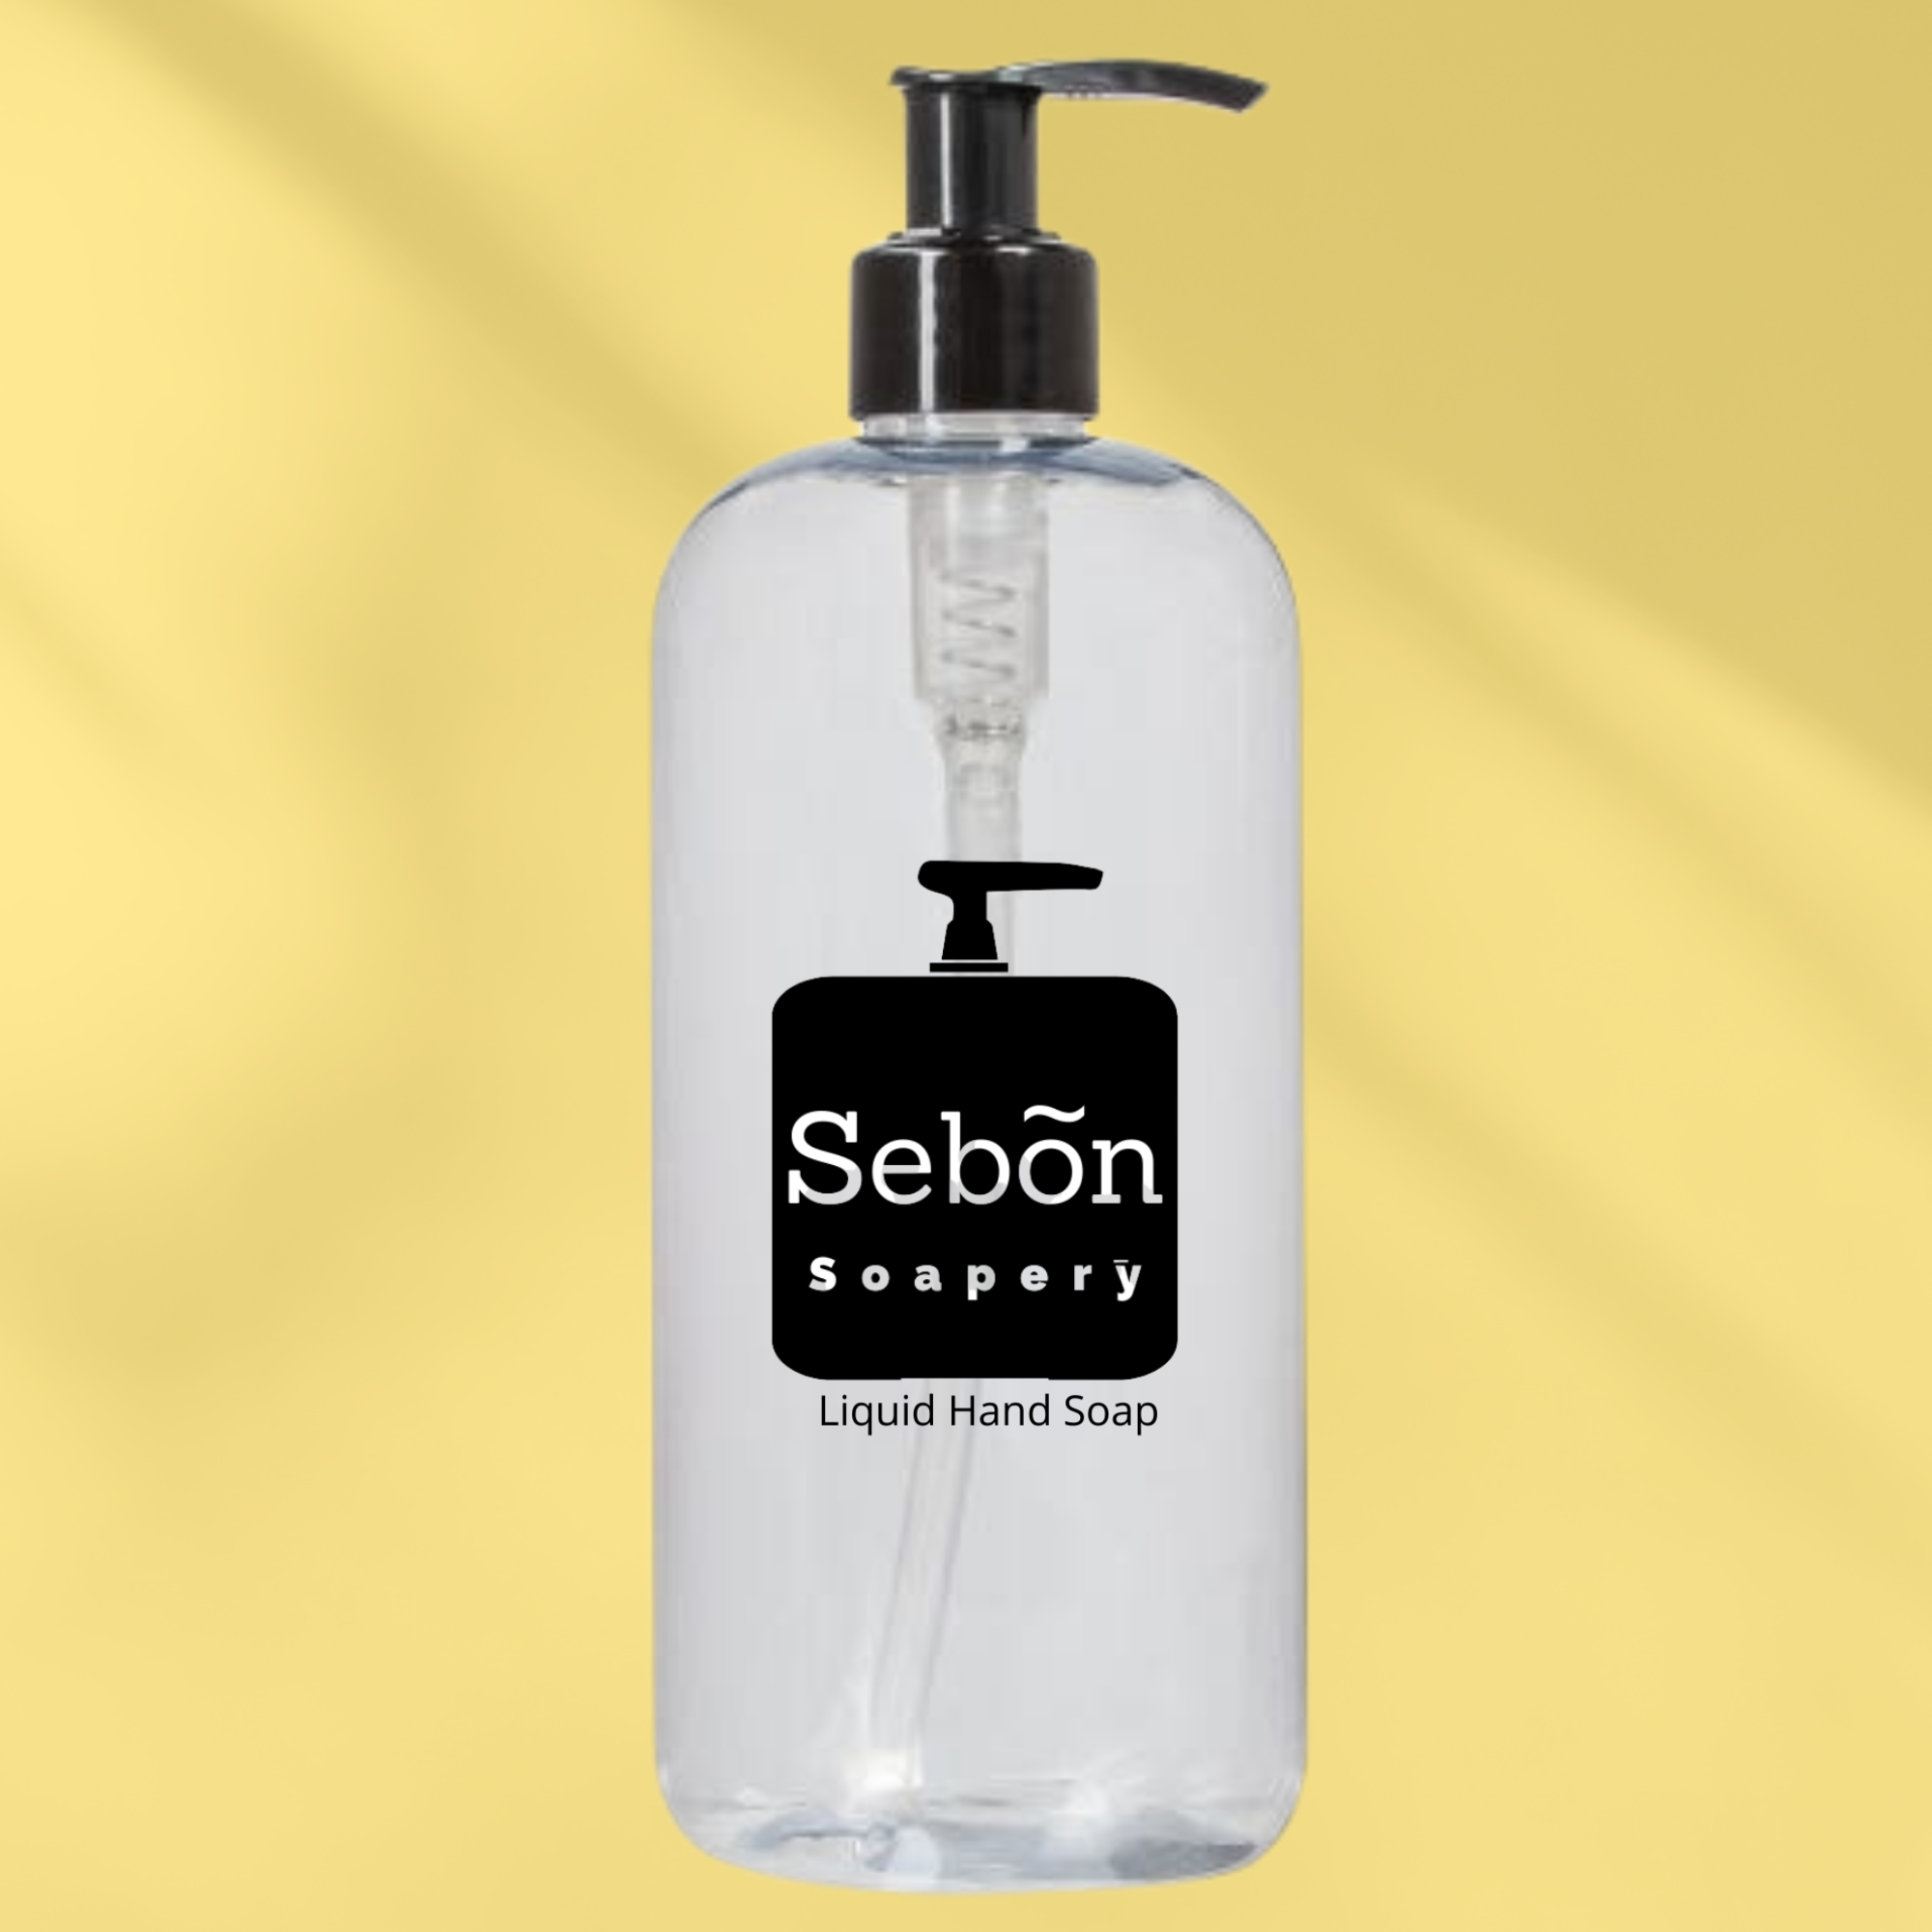 Sebon Buttered Popcorn Scented Liquid Hand Soap with Olive Oil